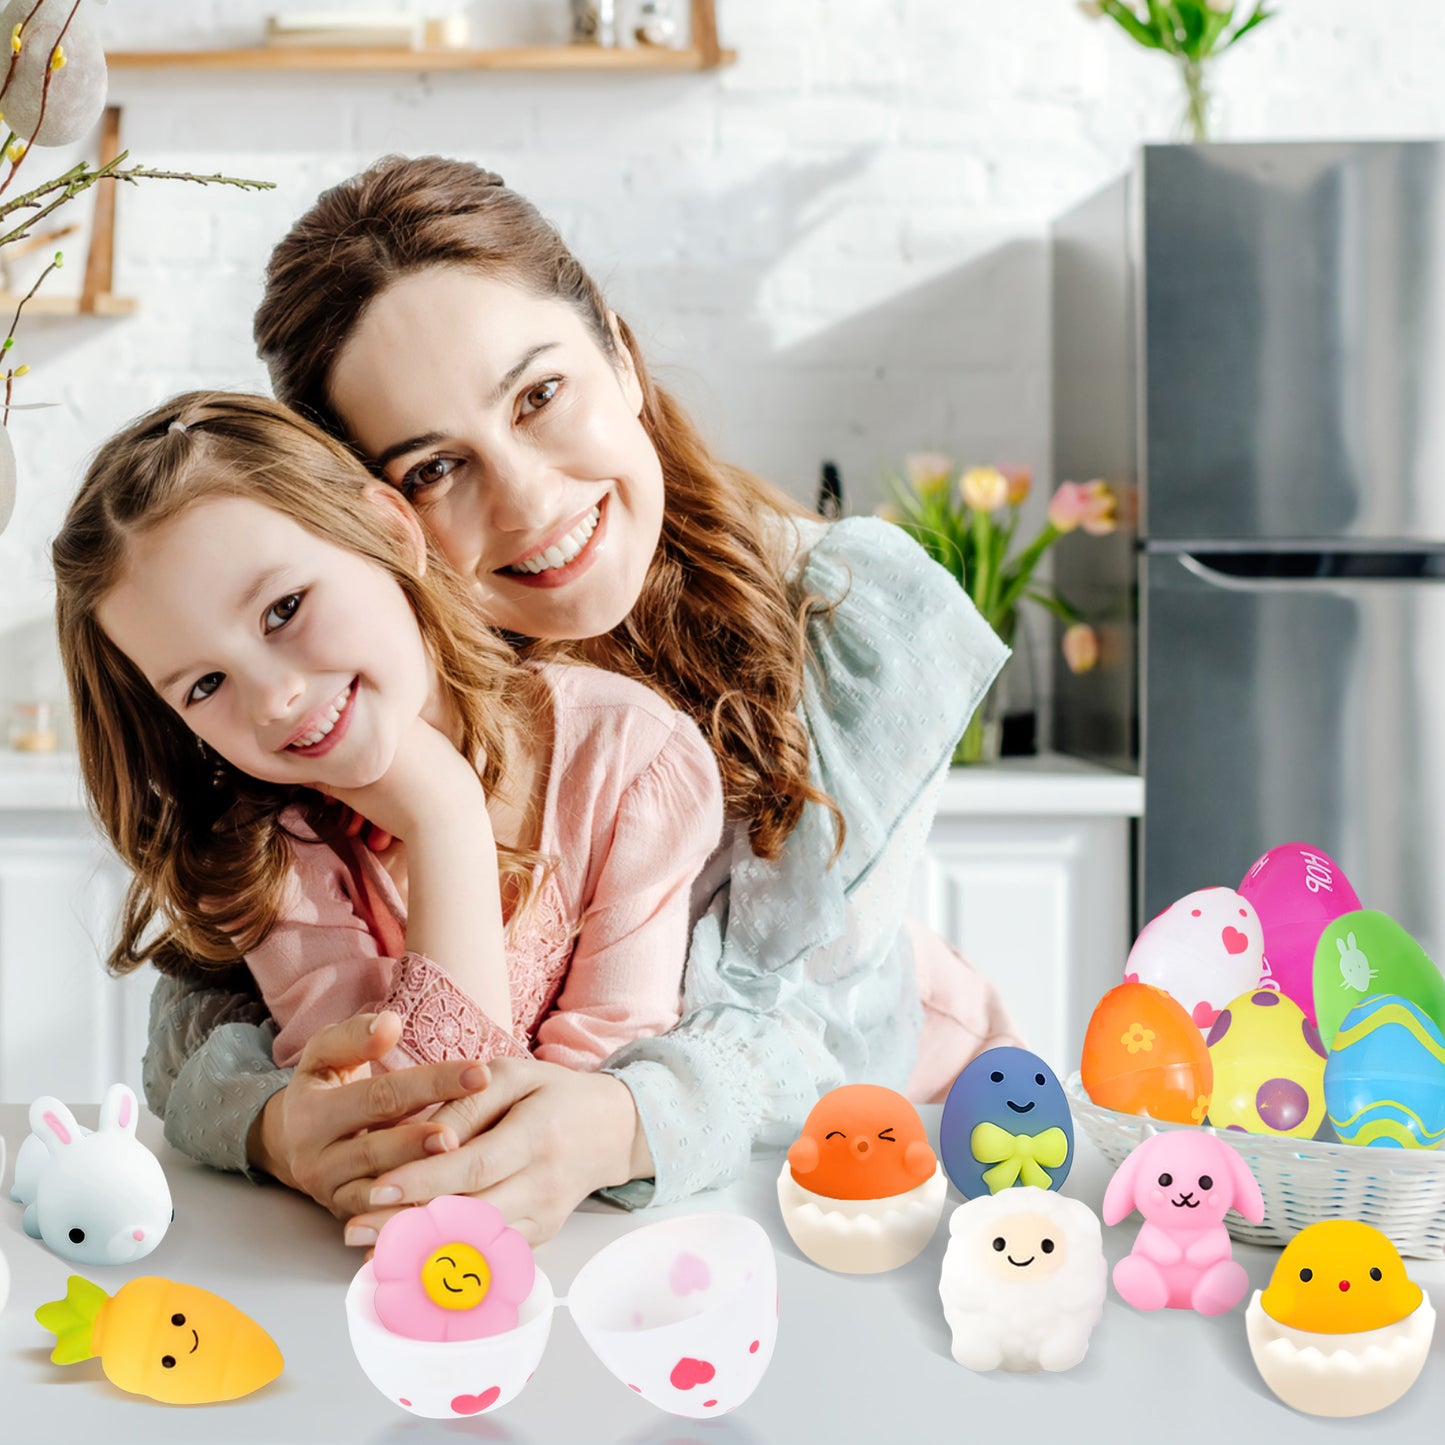 JoyX Easter Eggs Filled Mochi Squishy Toys (12 pcs) for Stress Relief & Party Favors